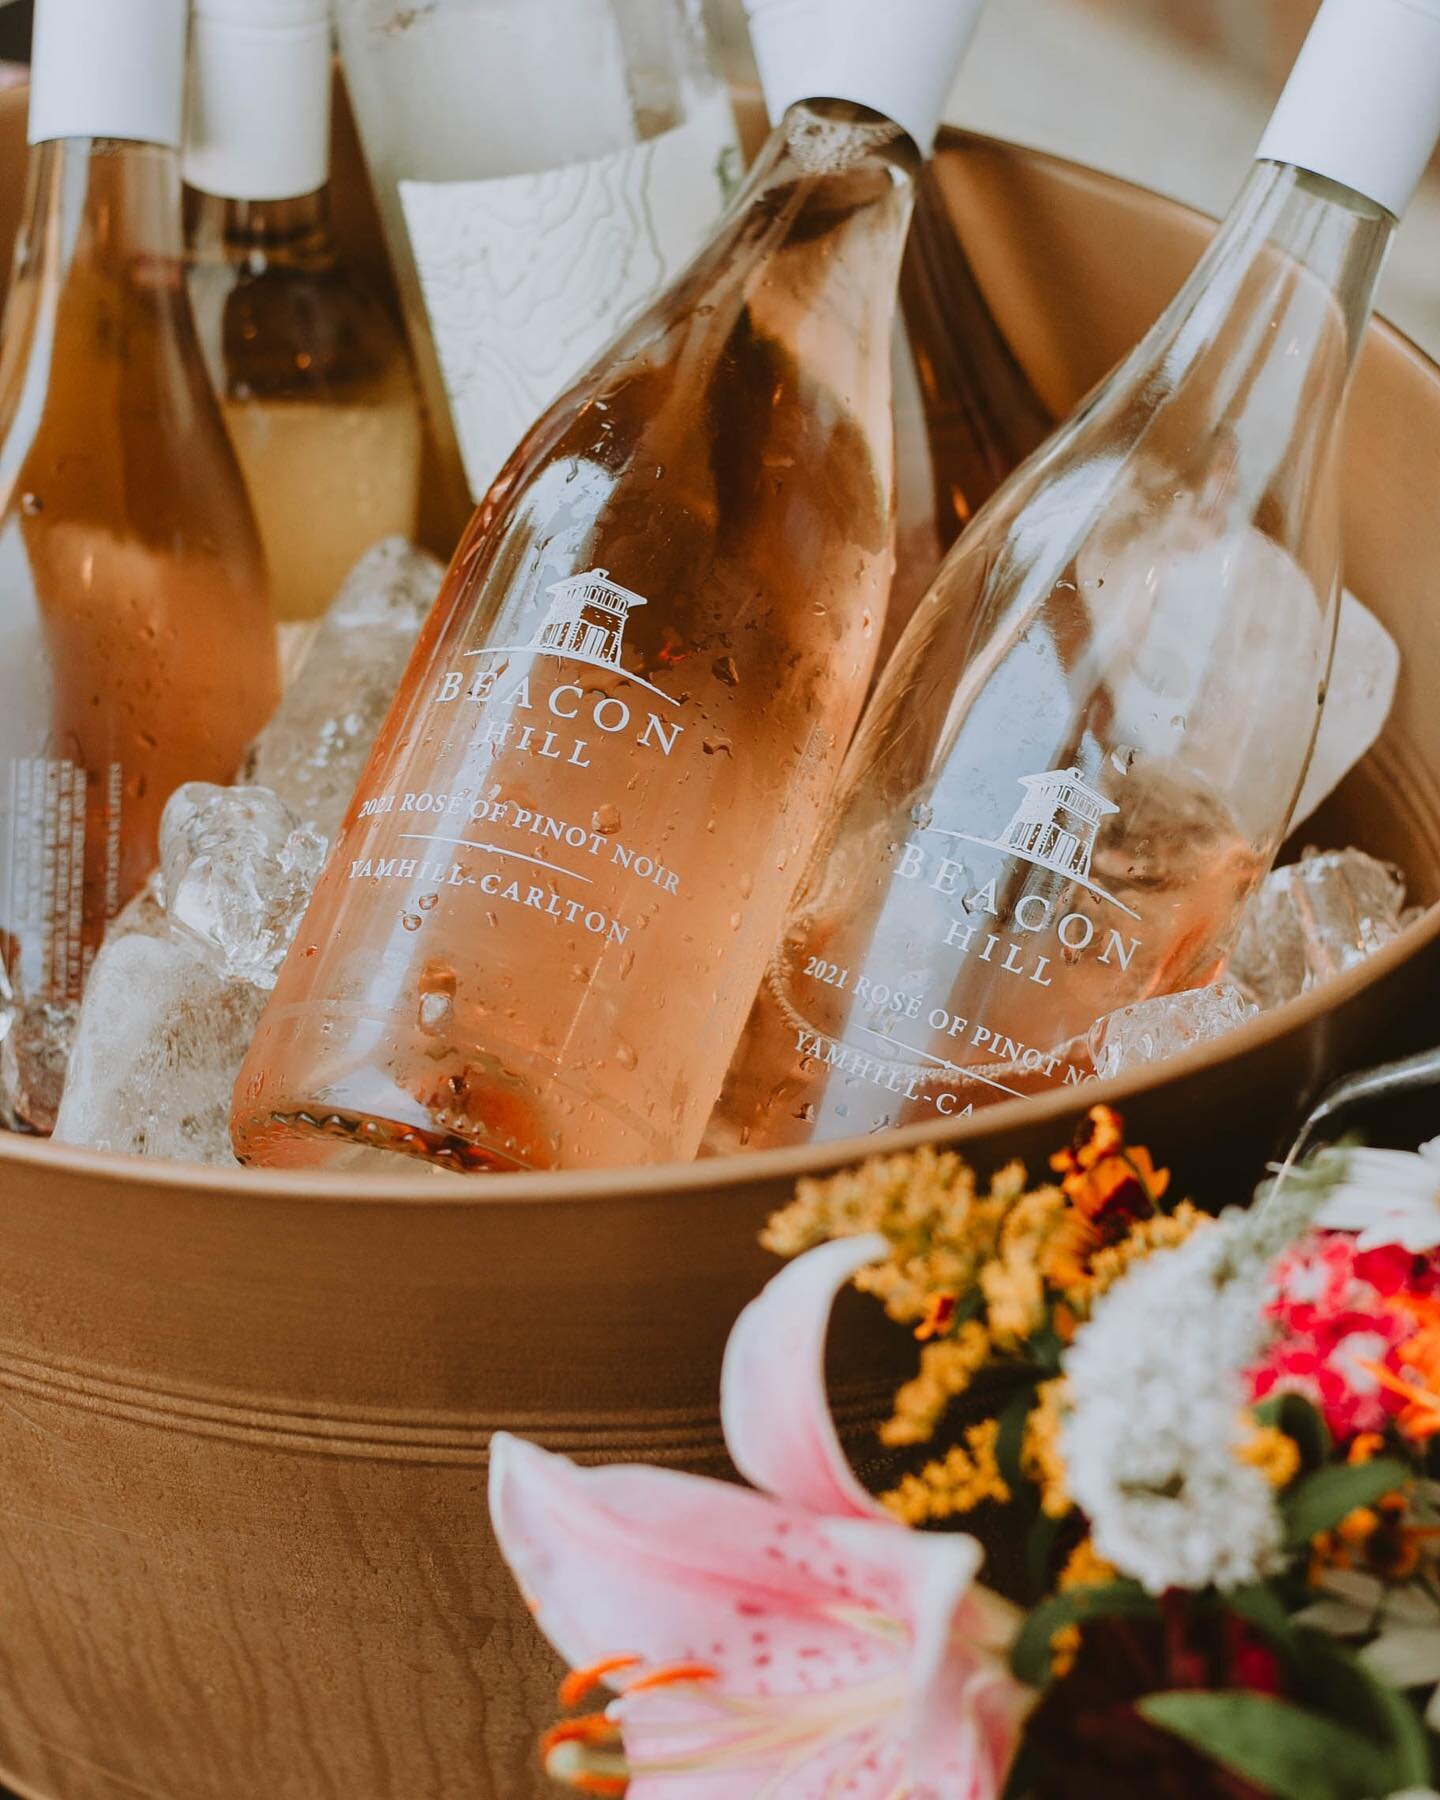 Cheers to all the Moms out there! 

From now through Mother&rsquo;s Day enjoy 10% off all online Ros&eacute; purchases! 

Discount code: ROSEALLDAY

Link in bio!

#ros&eacute;allday #willamettevalley #yamhillcarltonava #vino #delicious #summervibes #